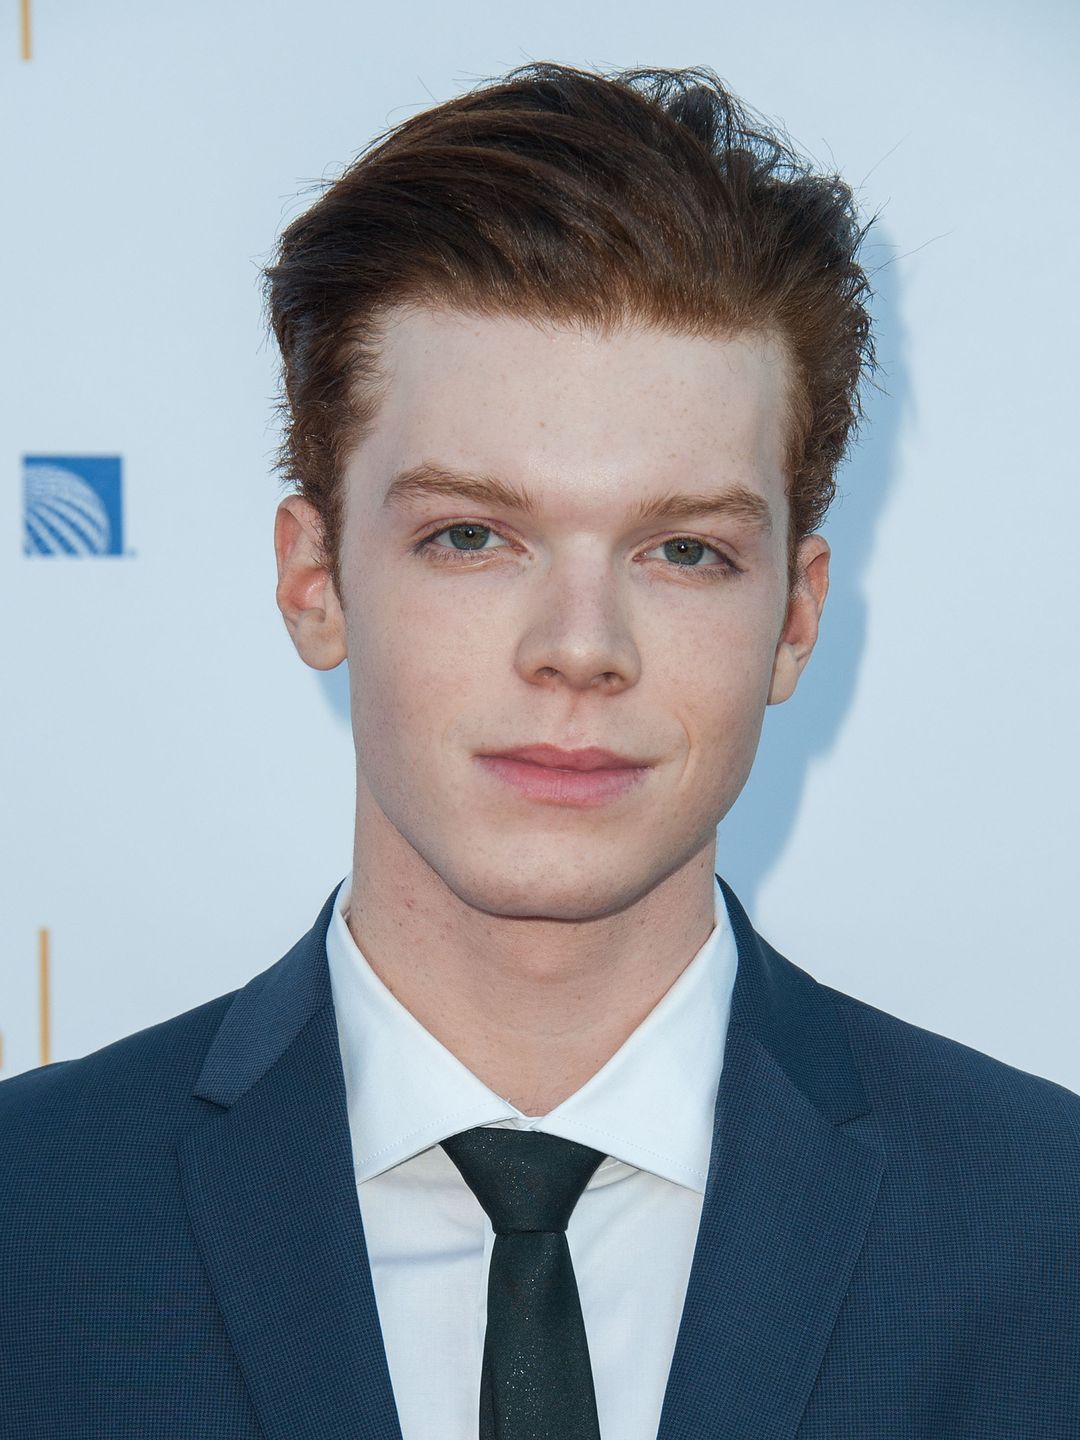 Cameron Monaghan who are his parents